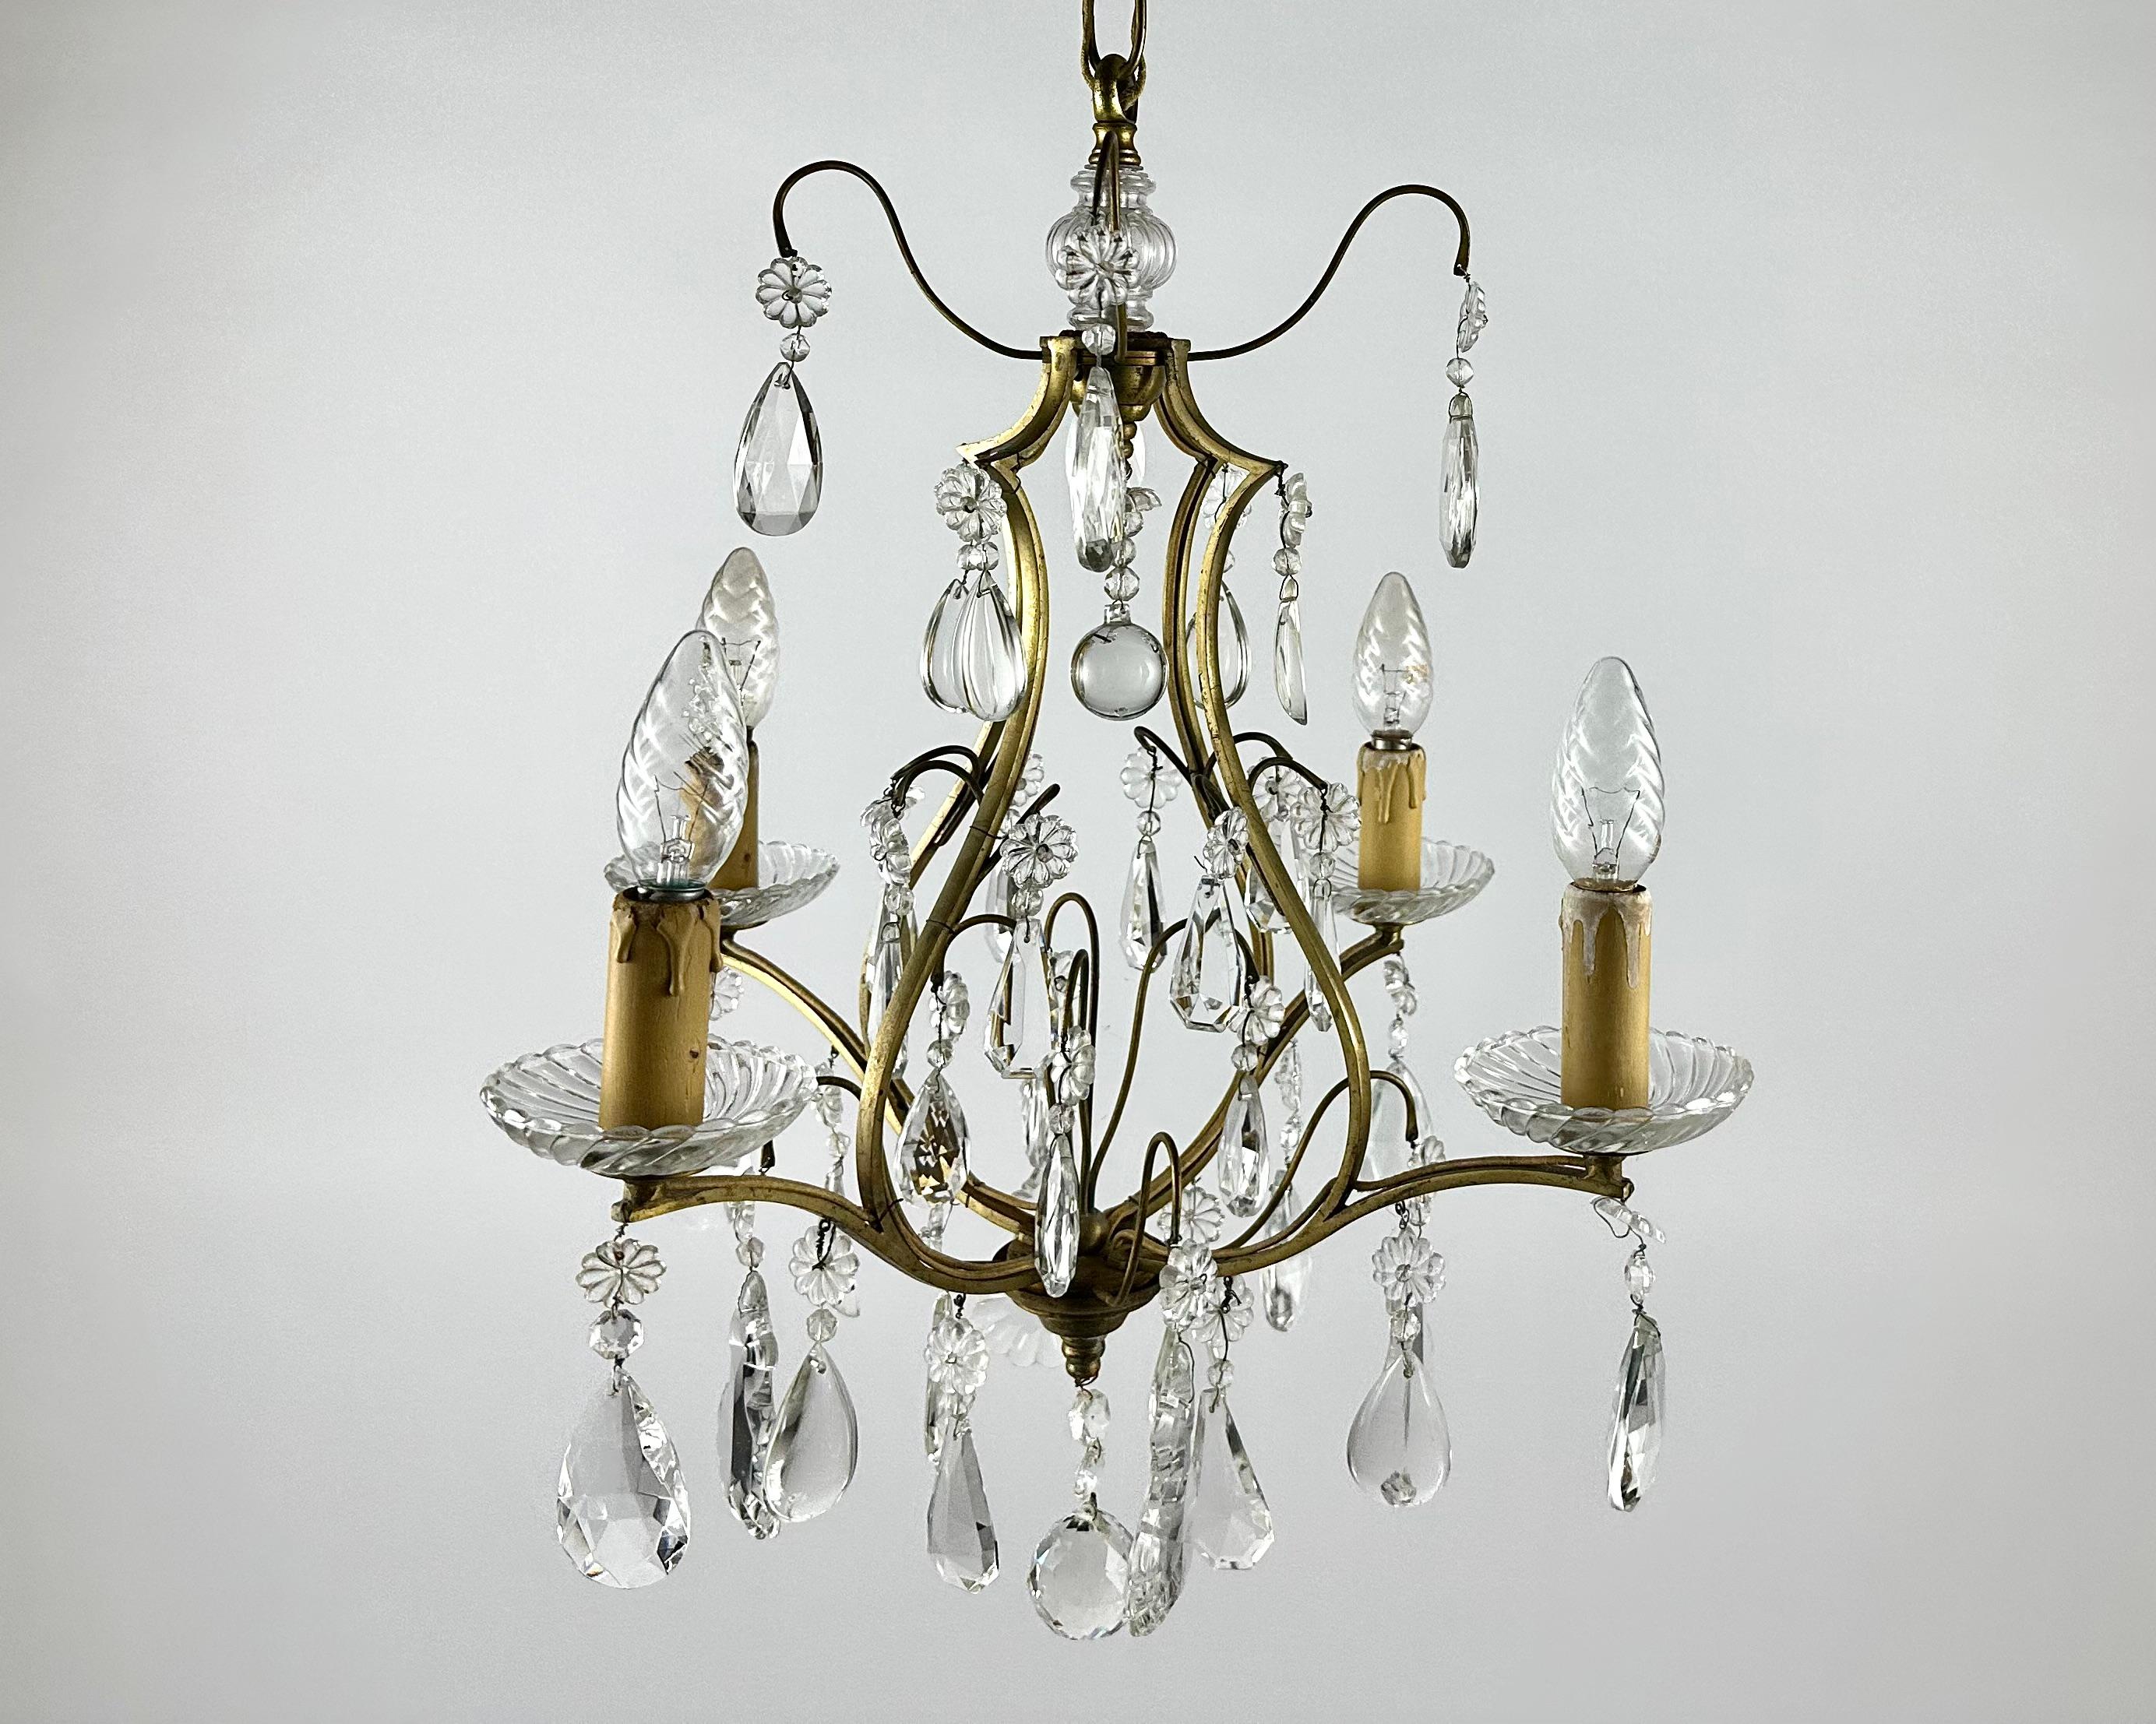 Gilt bronze chandelier with four arms of light holding crystal pendants.

Circa 1910-1920s Baroque Style Chandelier with four light bulbs.  

Manufactured in France.  

Richly fecorated chandelier's framework is in gilt brass with transparent cut